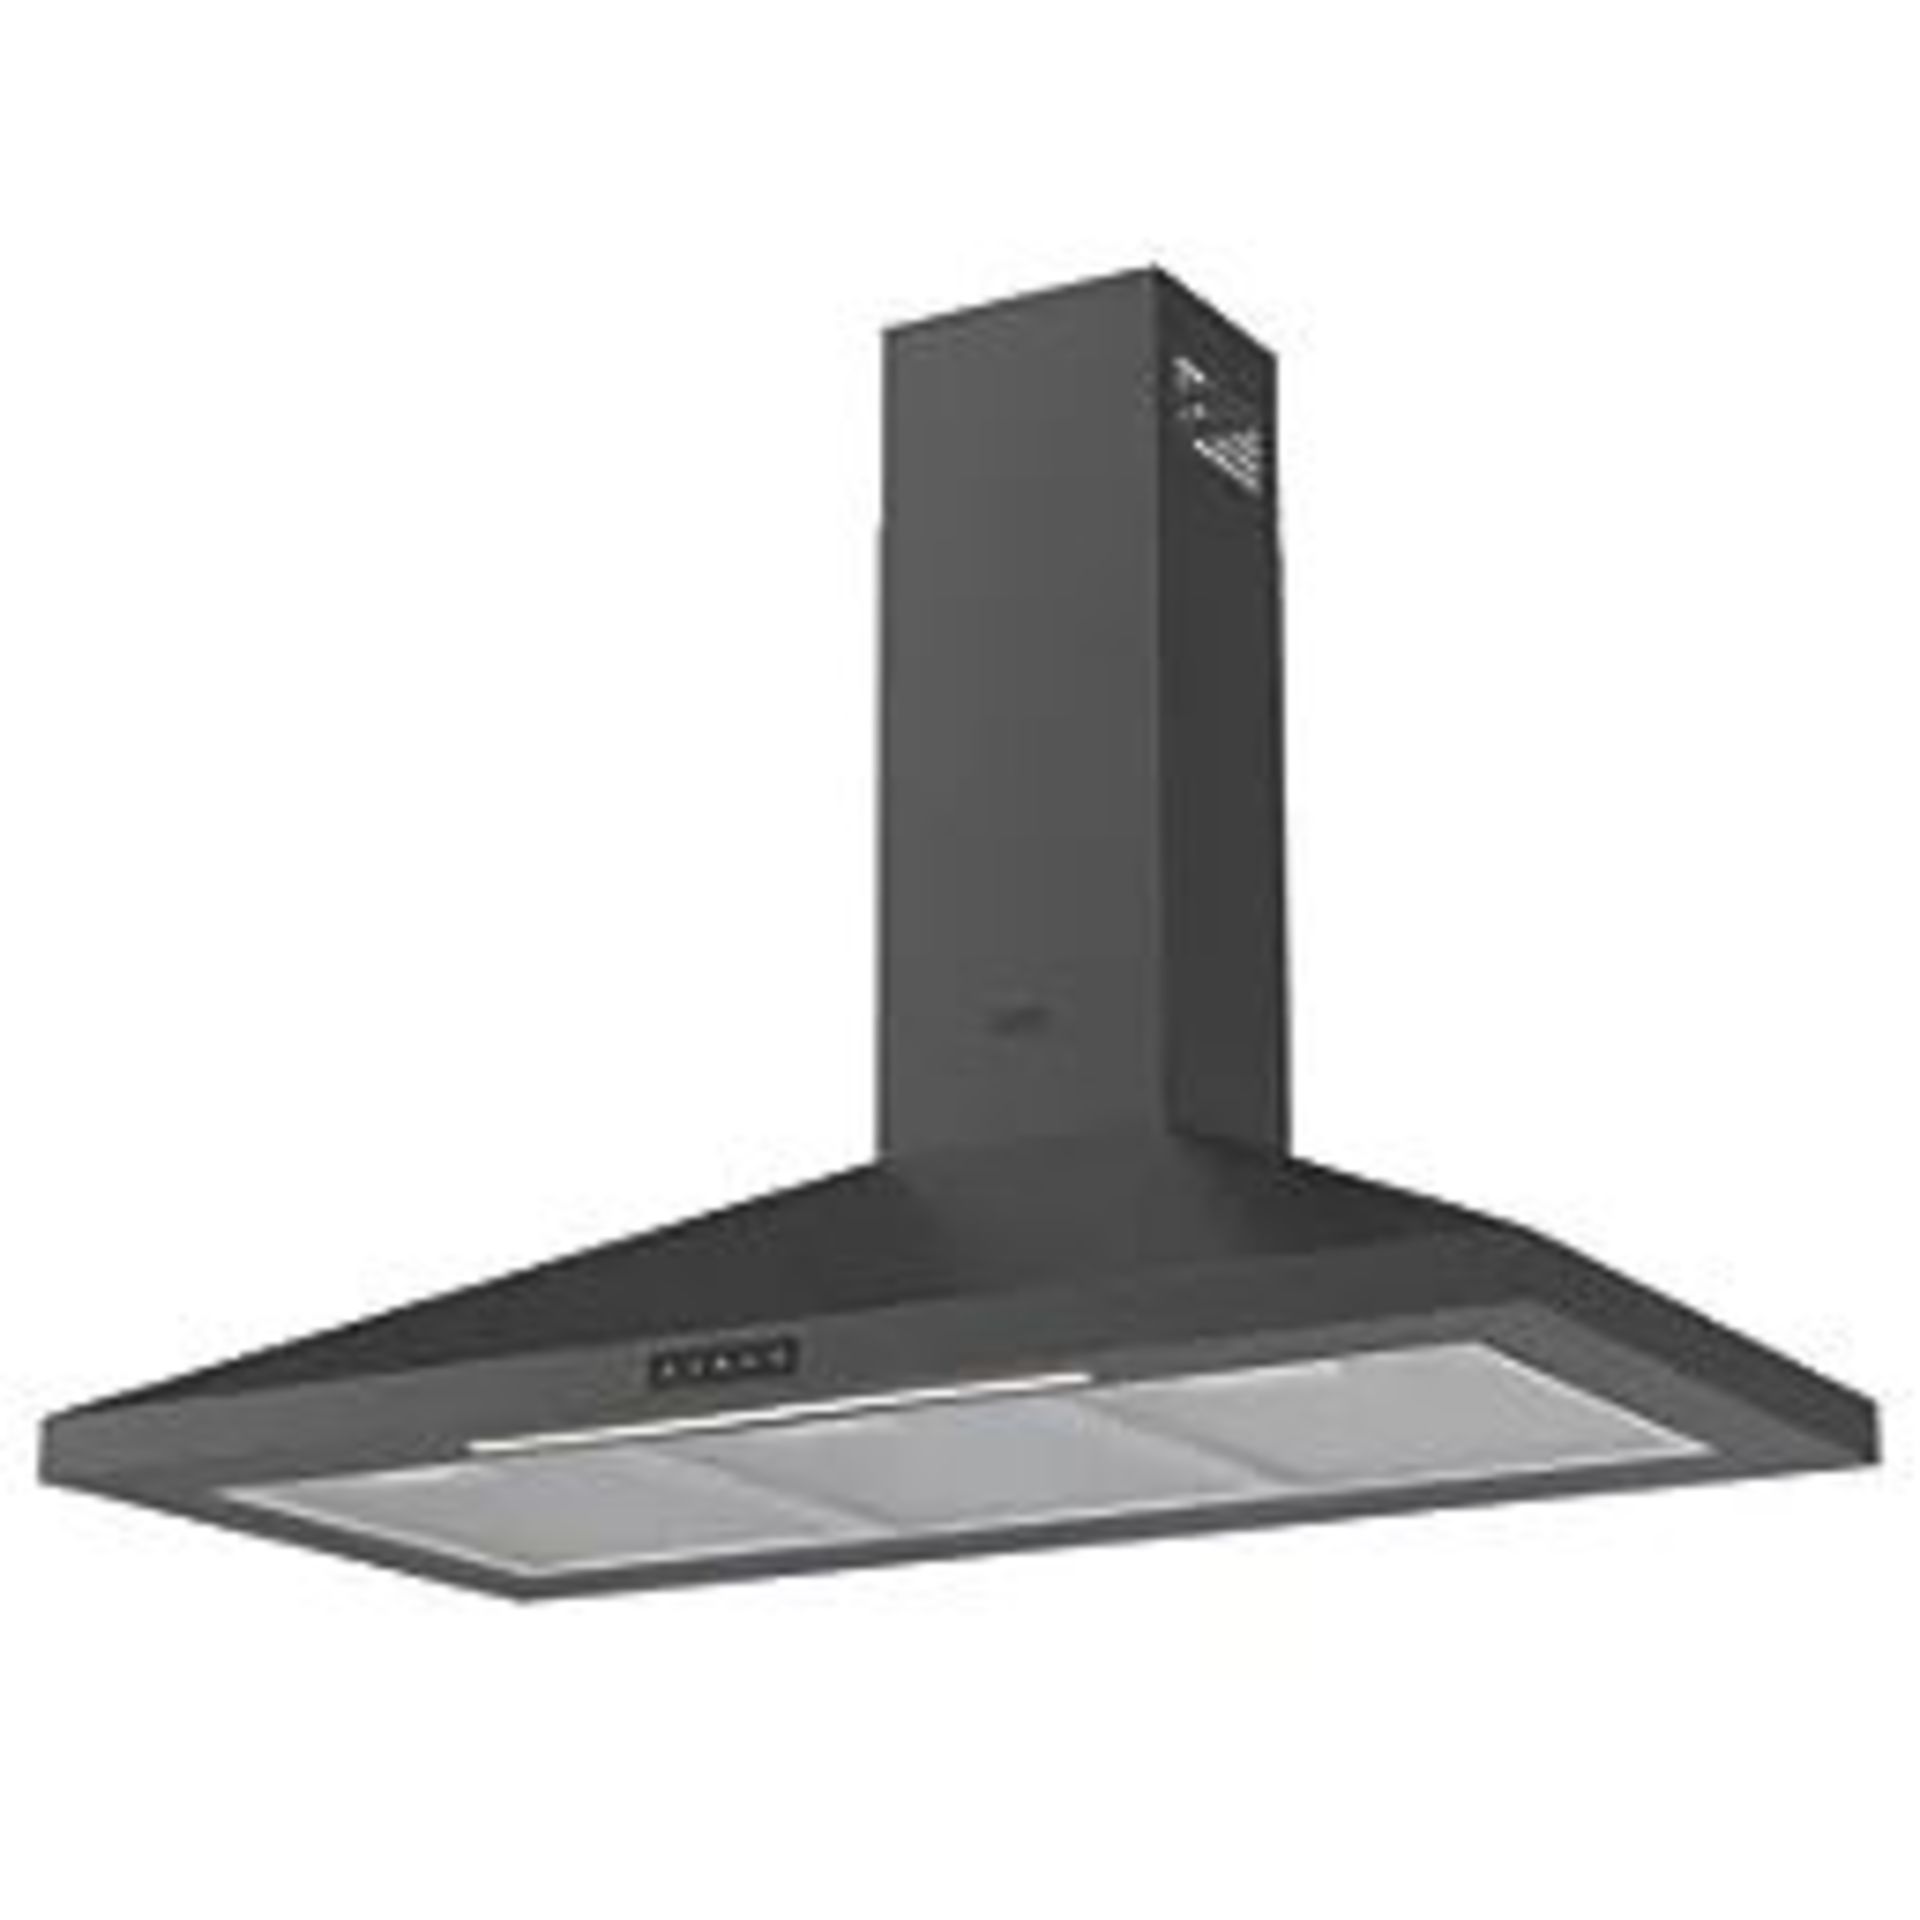 COOKE & LEWIS CHIMNEY HOOD BLACK 898MM . - R9BW. Quiet but powerful adjustable cooker hood featuring